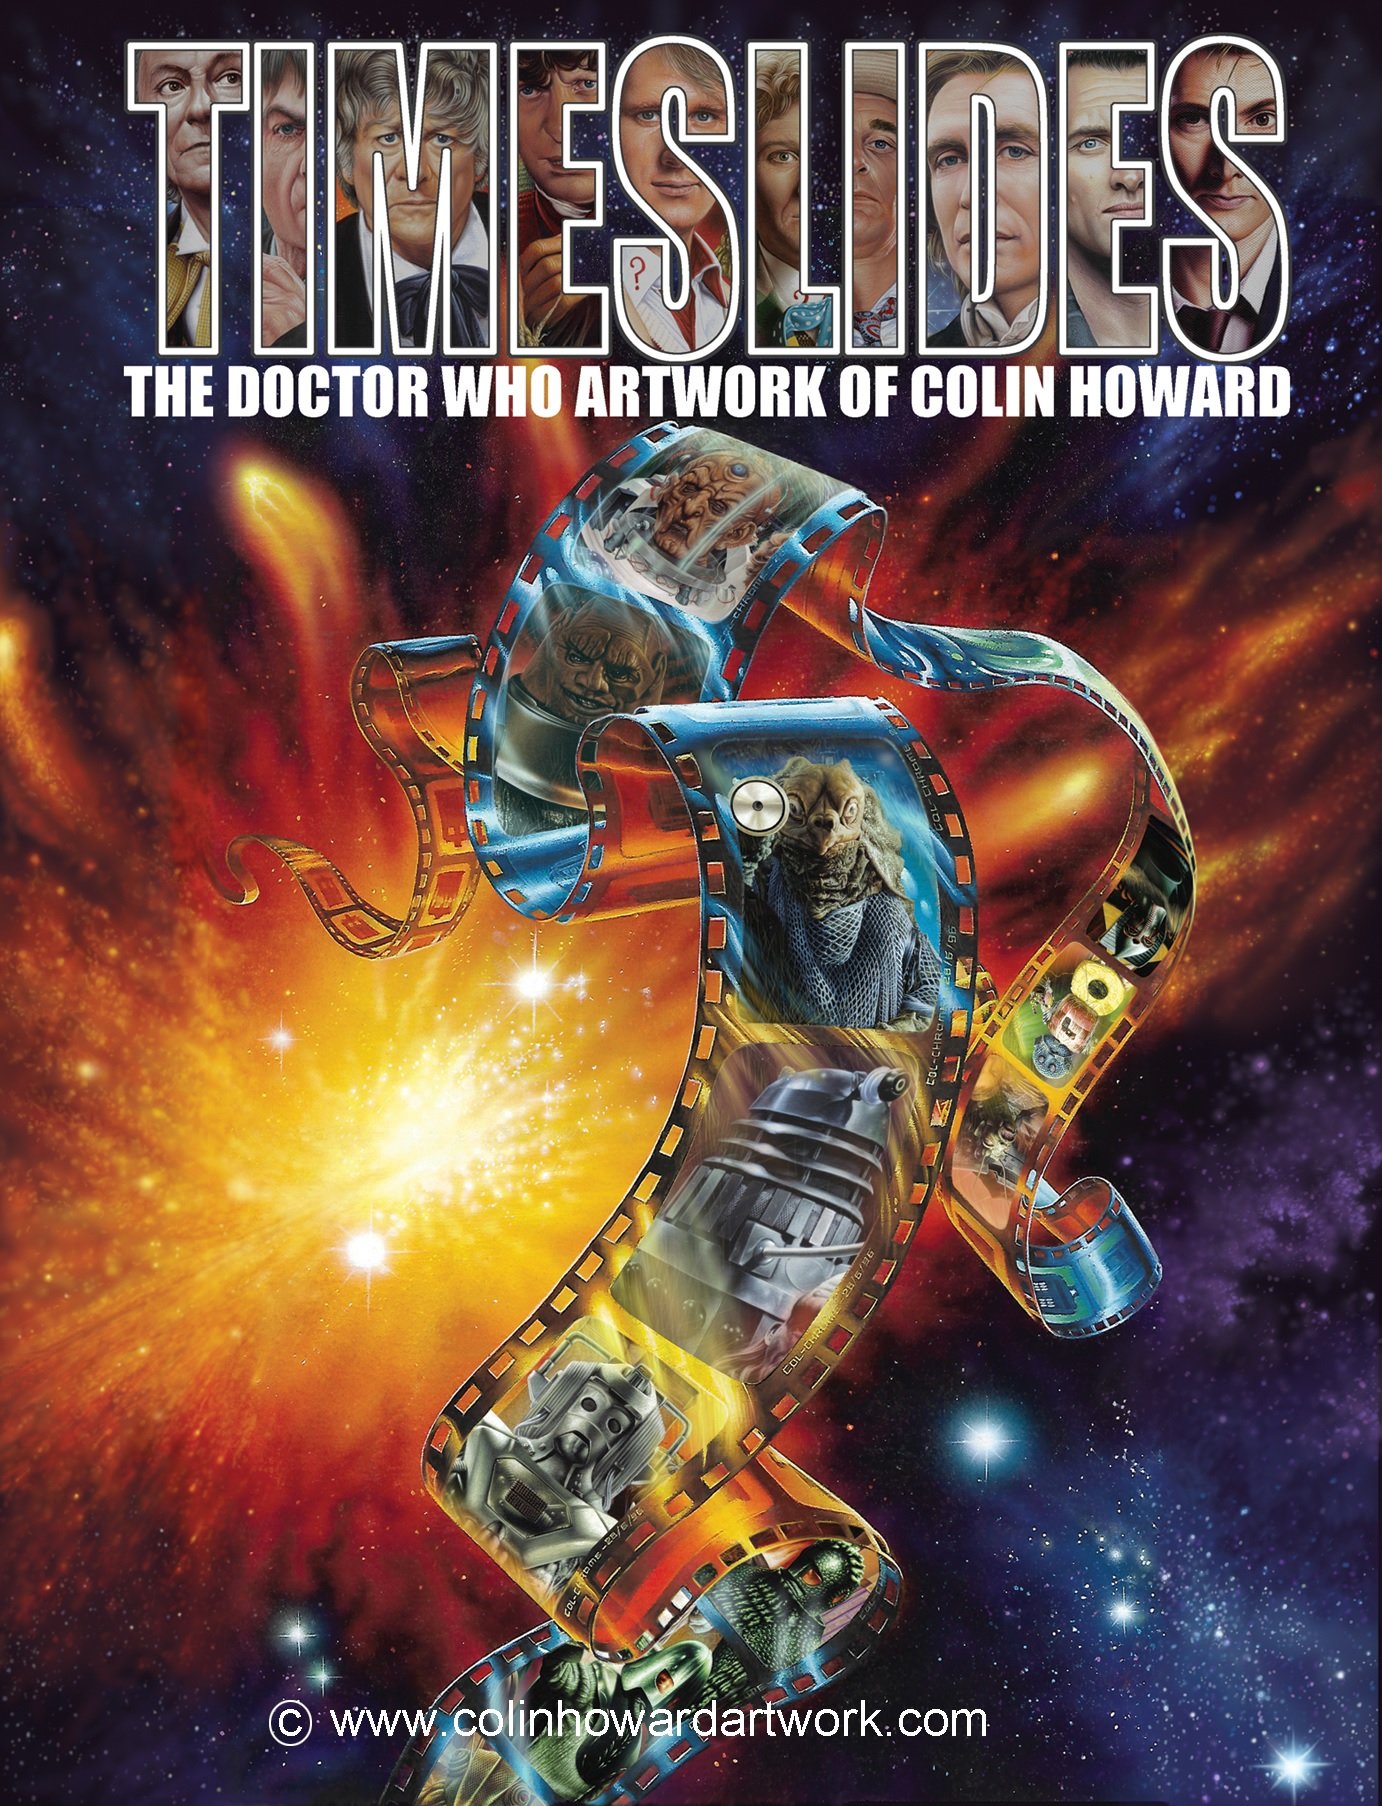 Reviewed: Timeslides — The Doctor Who Artwork of Colin Howard